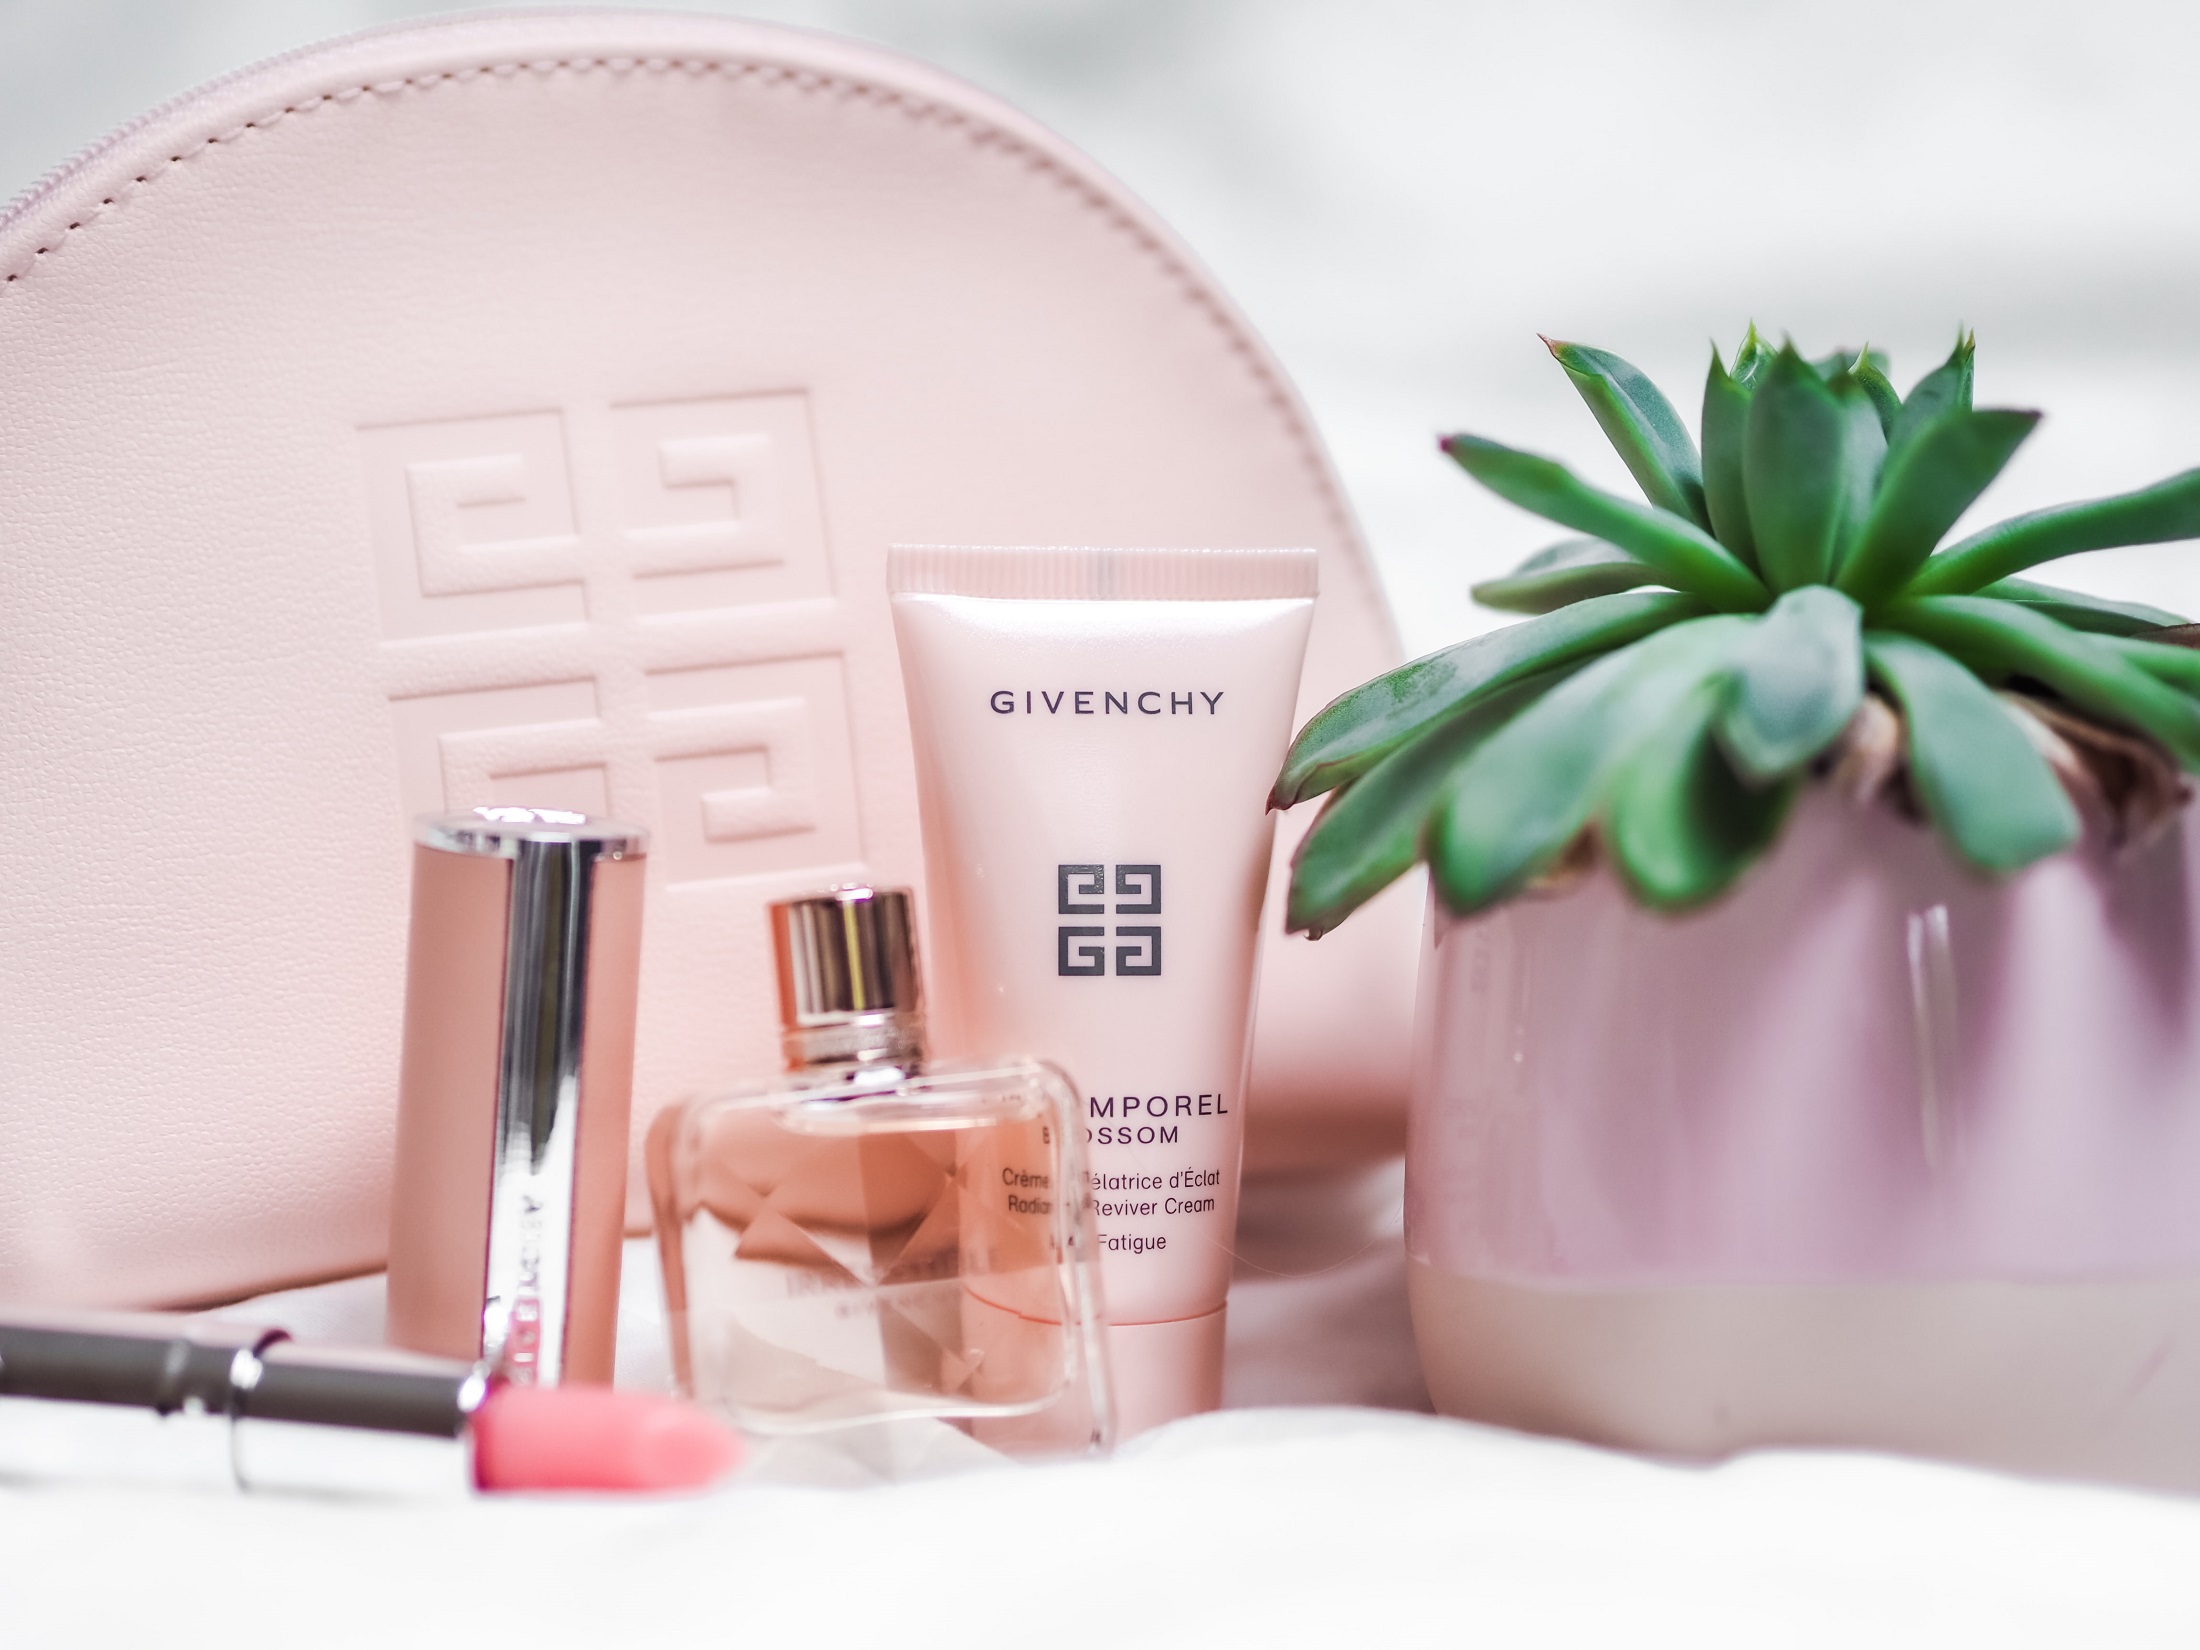 Minimalism in cosmetic bag – which products are not essential in it?